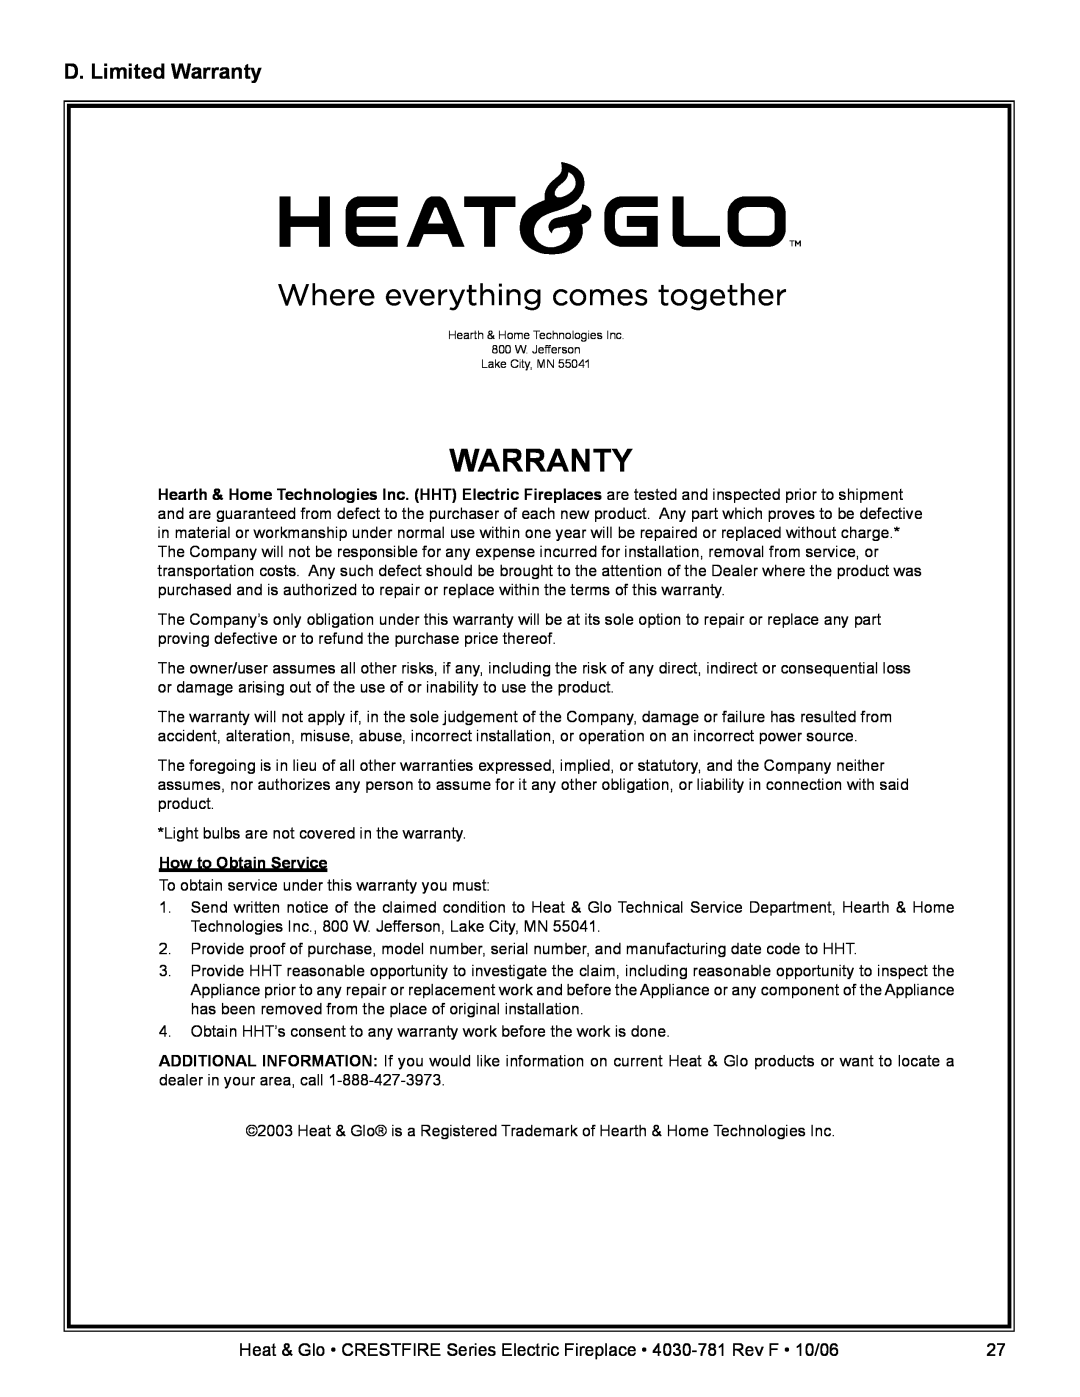 Heat & Glo LifeStyle CF550E-B owner manual D. Limited Warranty, How to Obtain Service 